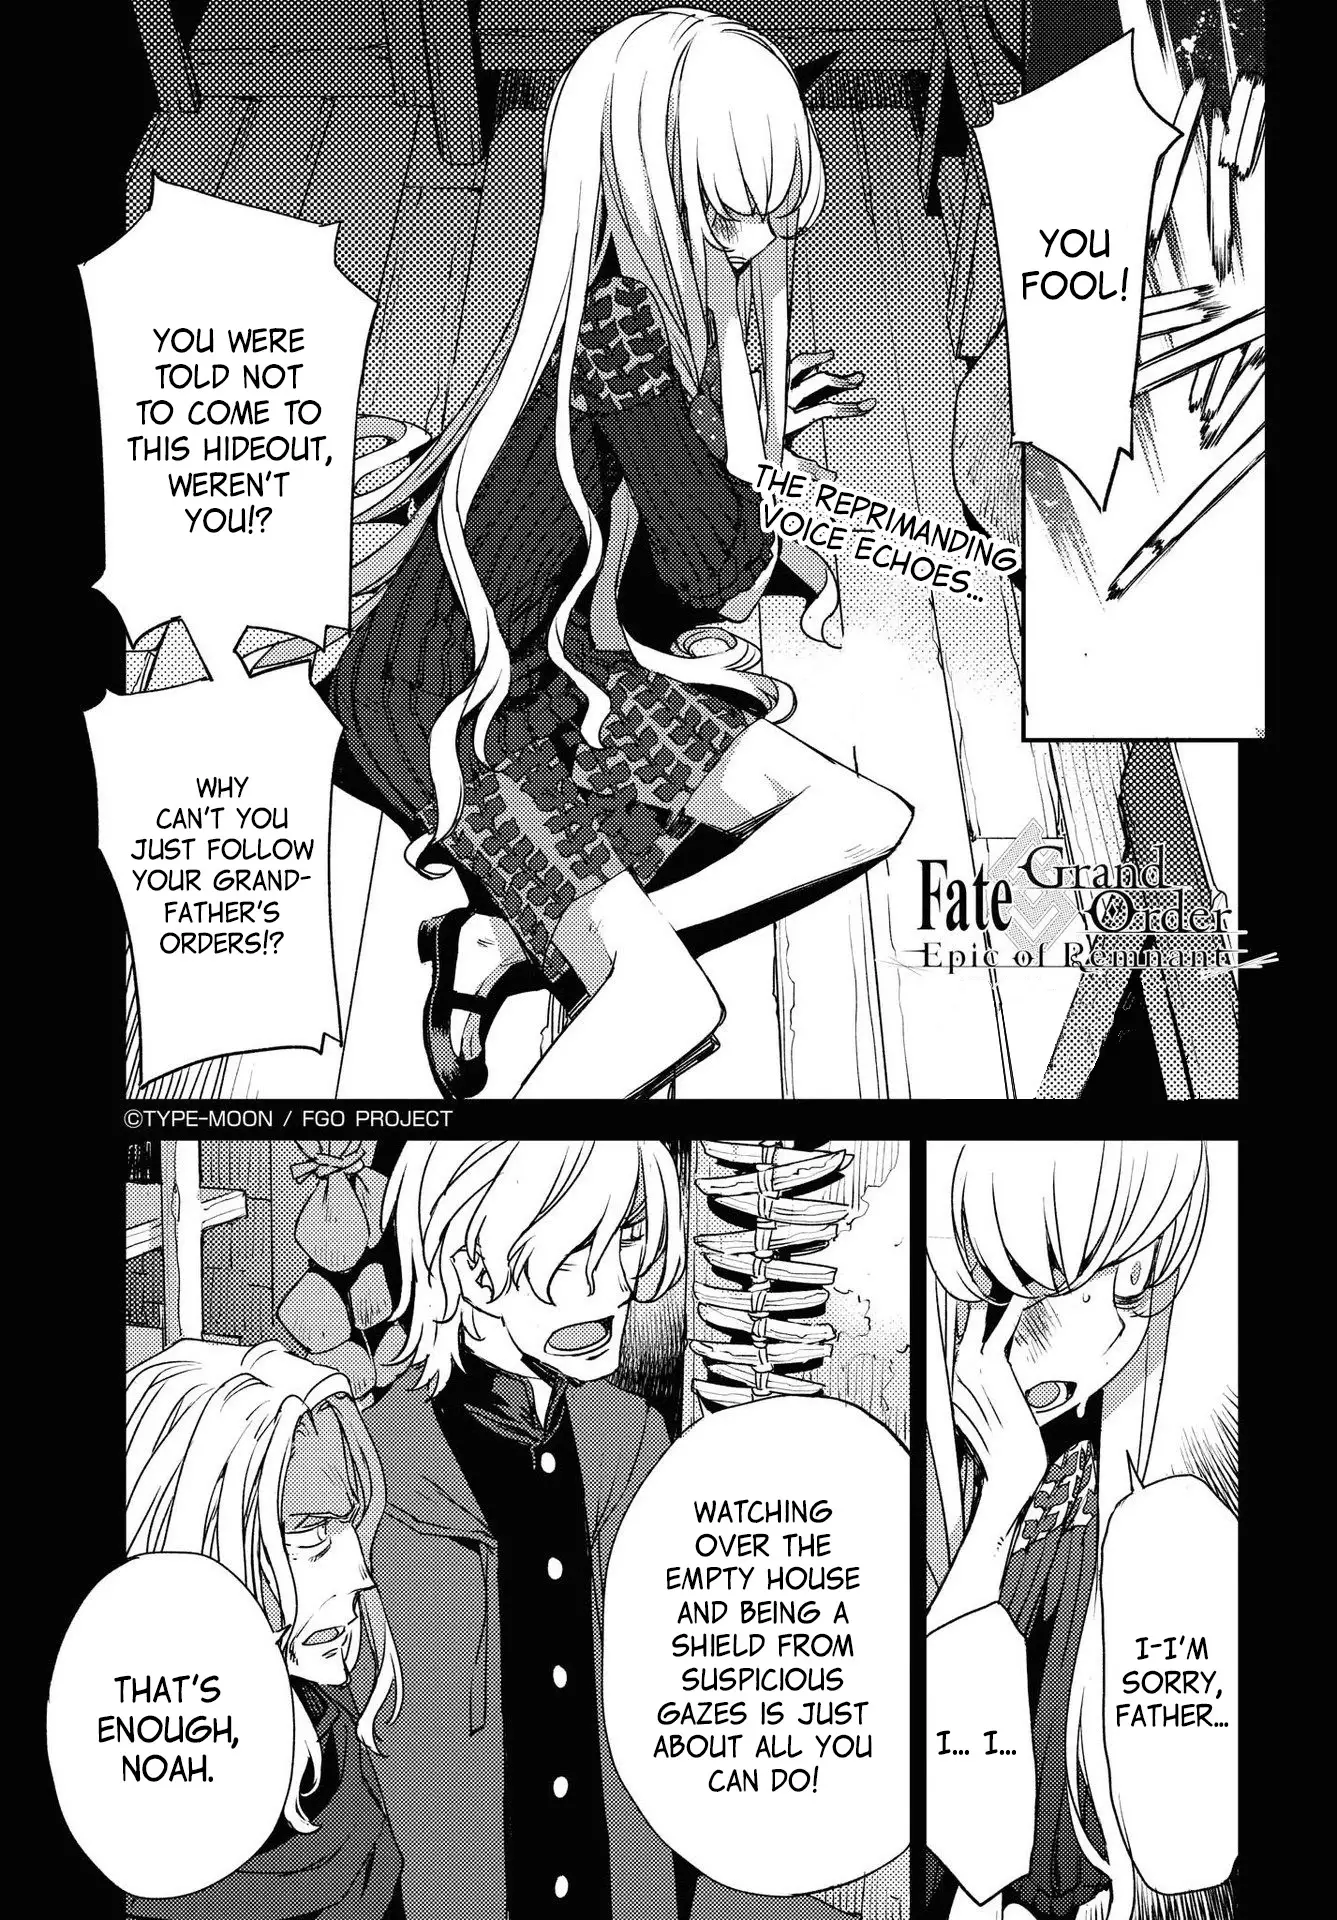 Fate/grand Order: Epic Of Remnant - Subspecies Singularity Iv: Taboo Advent Salem: Salem Of Heresy - 21 page 1-8f6dbb7b